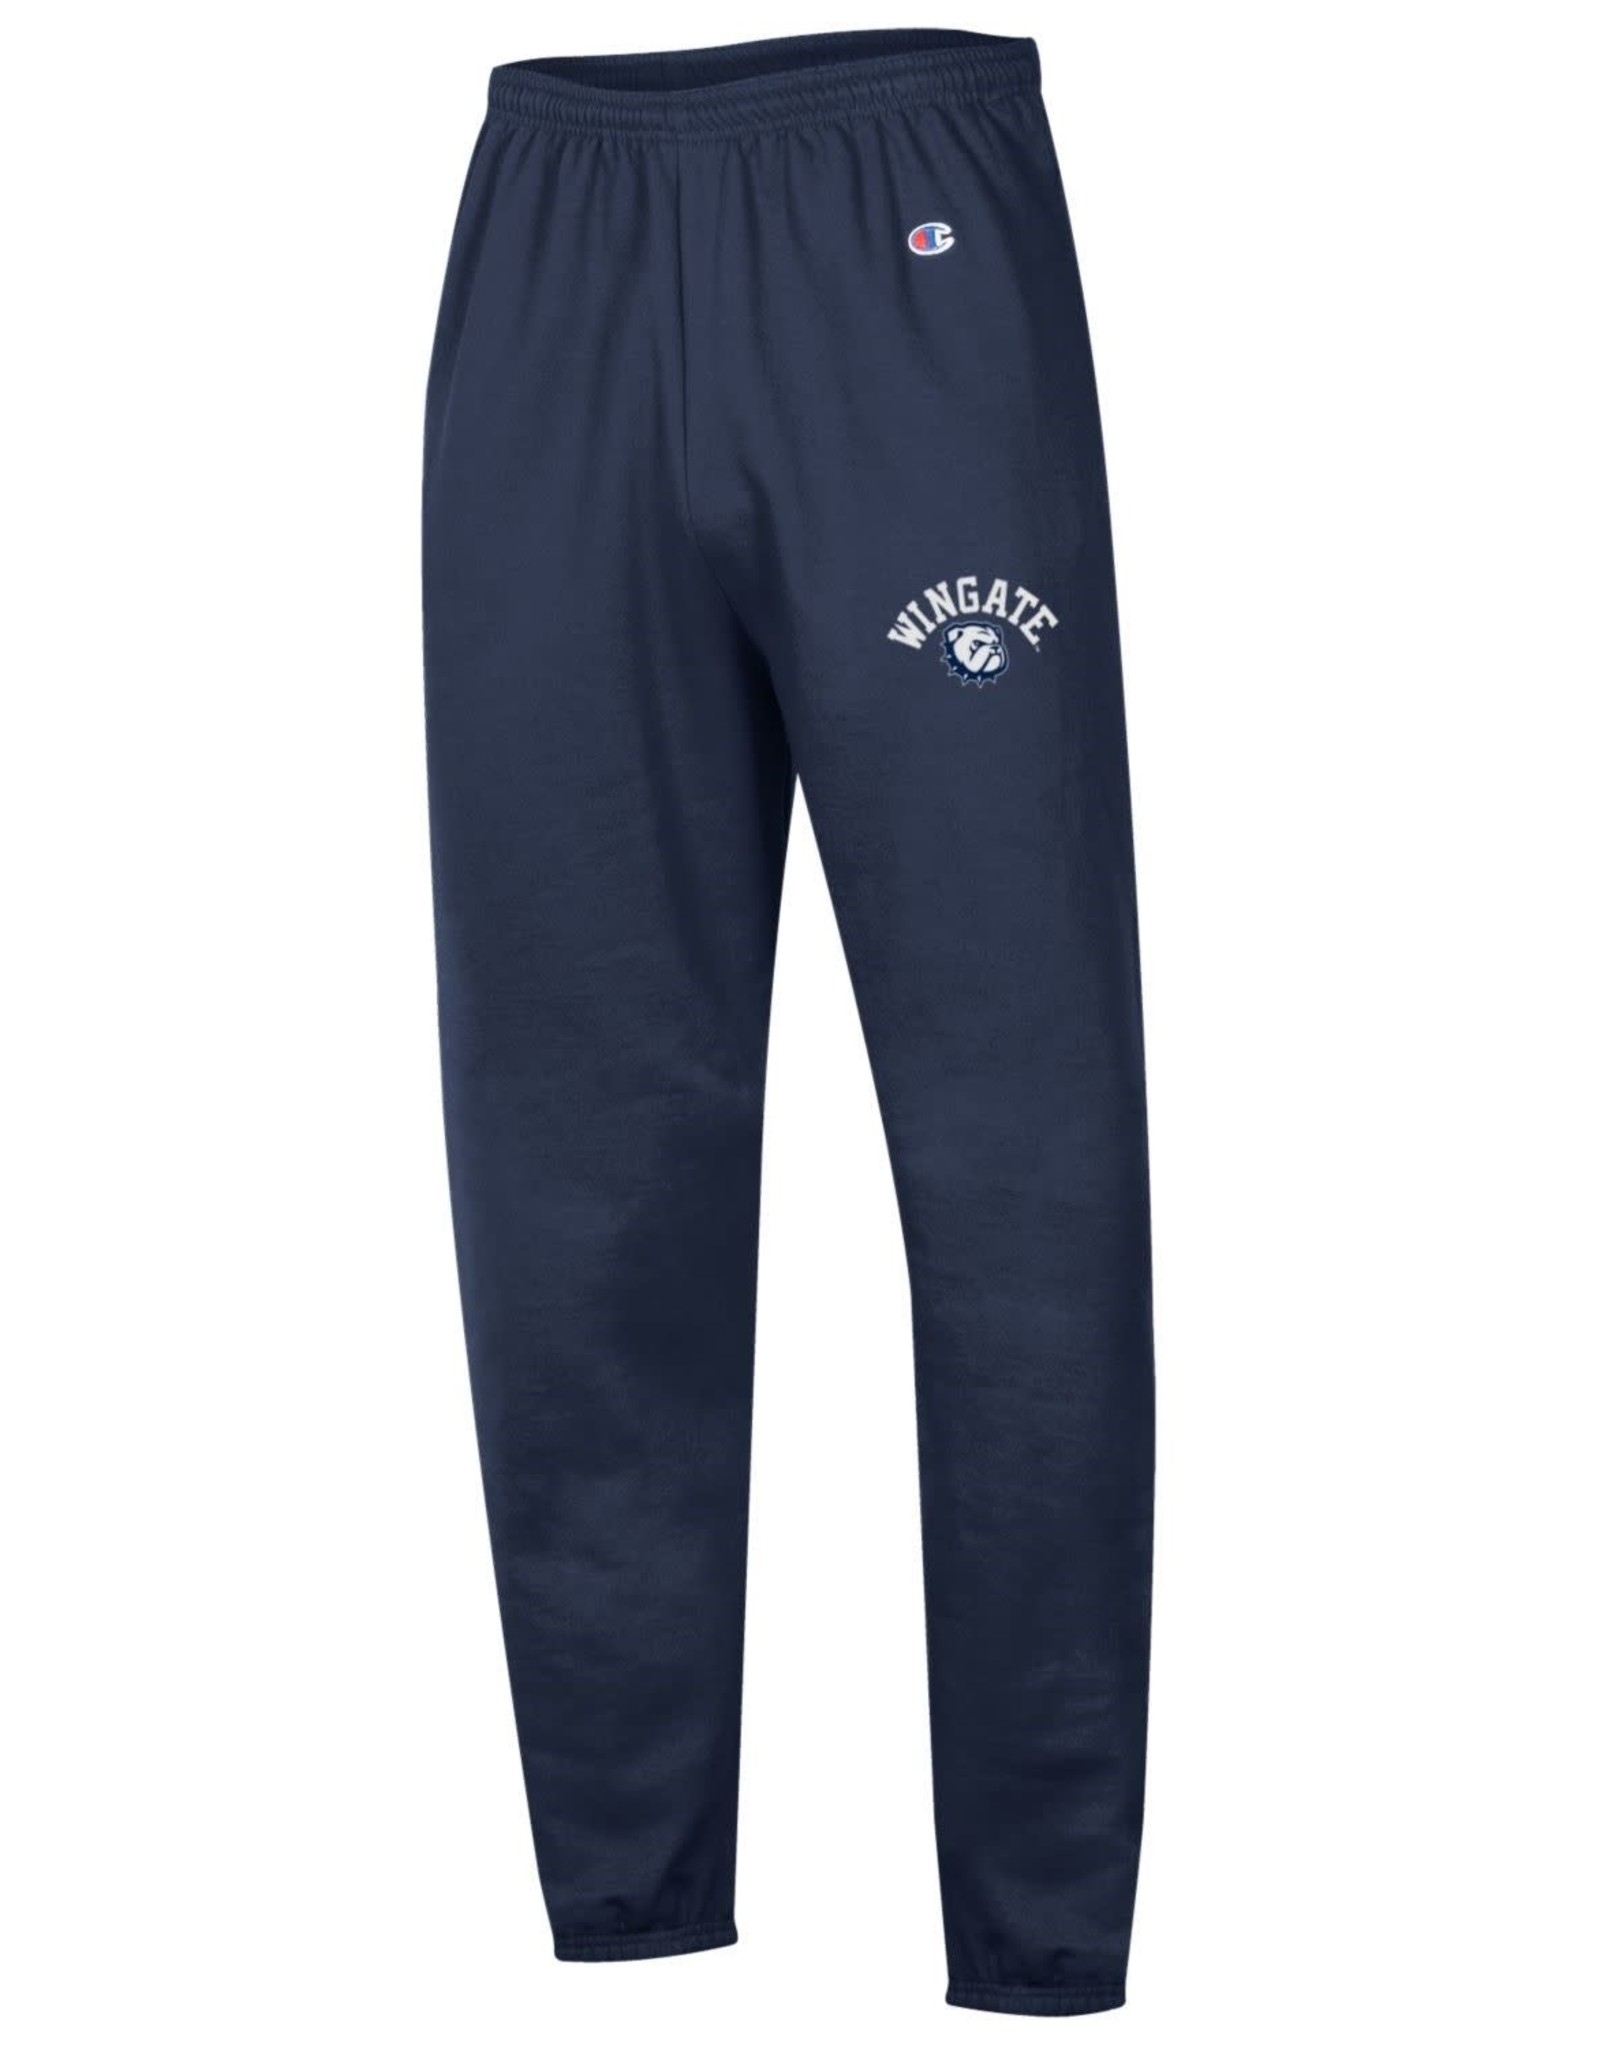 Navy Wingate Dog Head Powerblend Banded Sweatpants - Wingate Outfitters